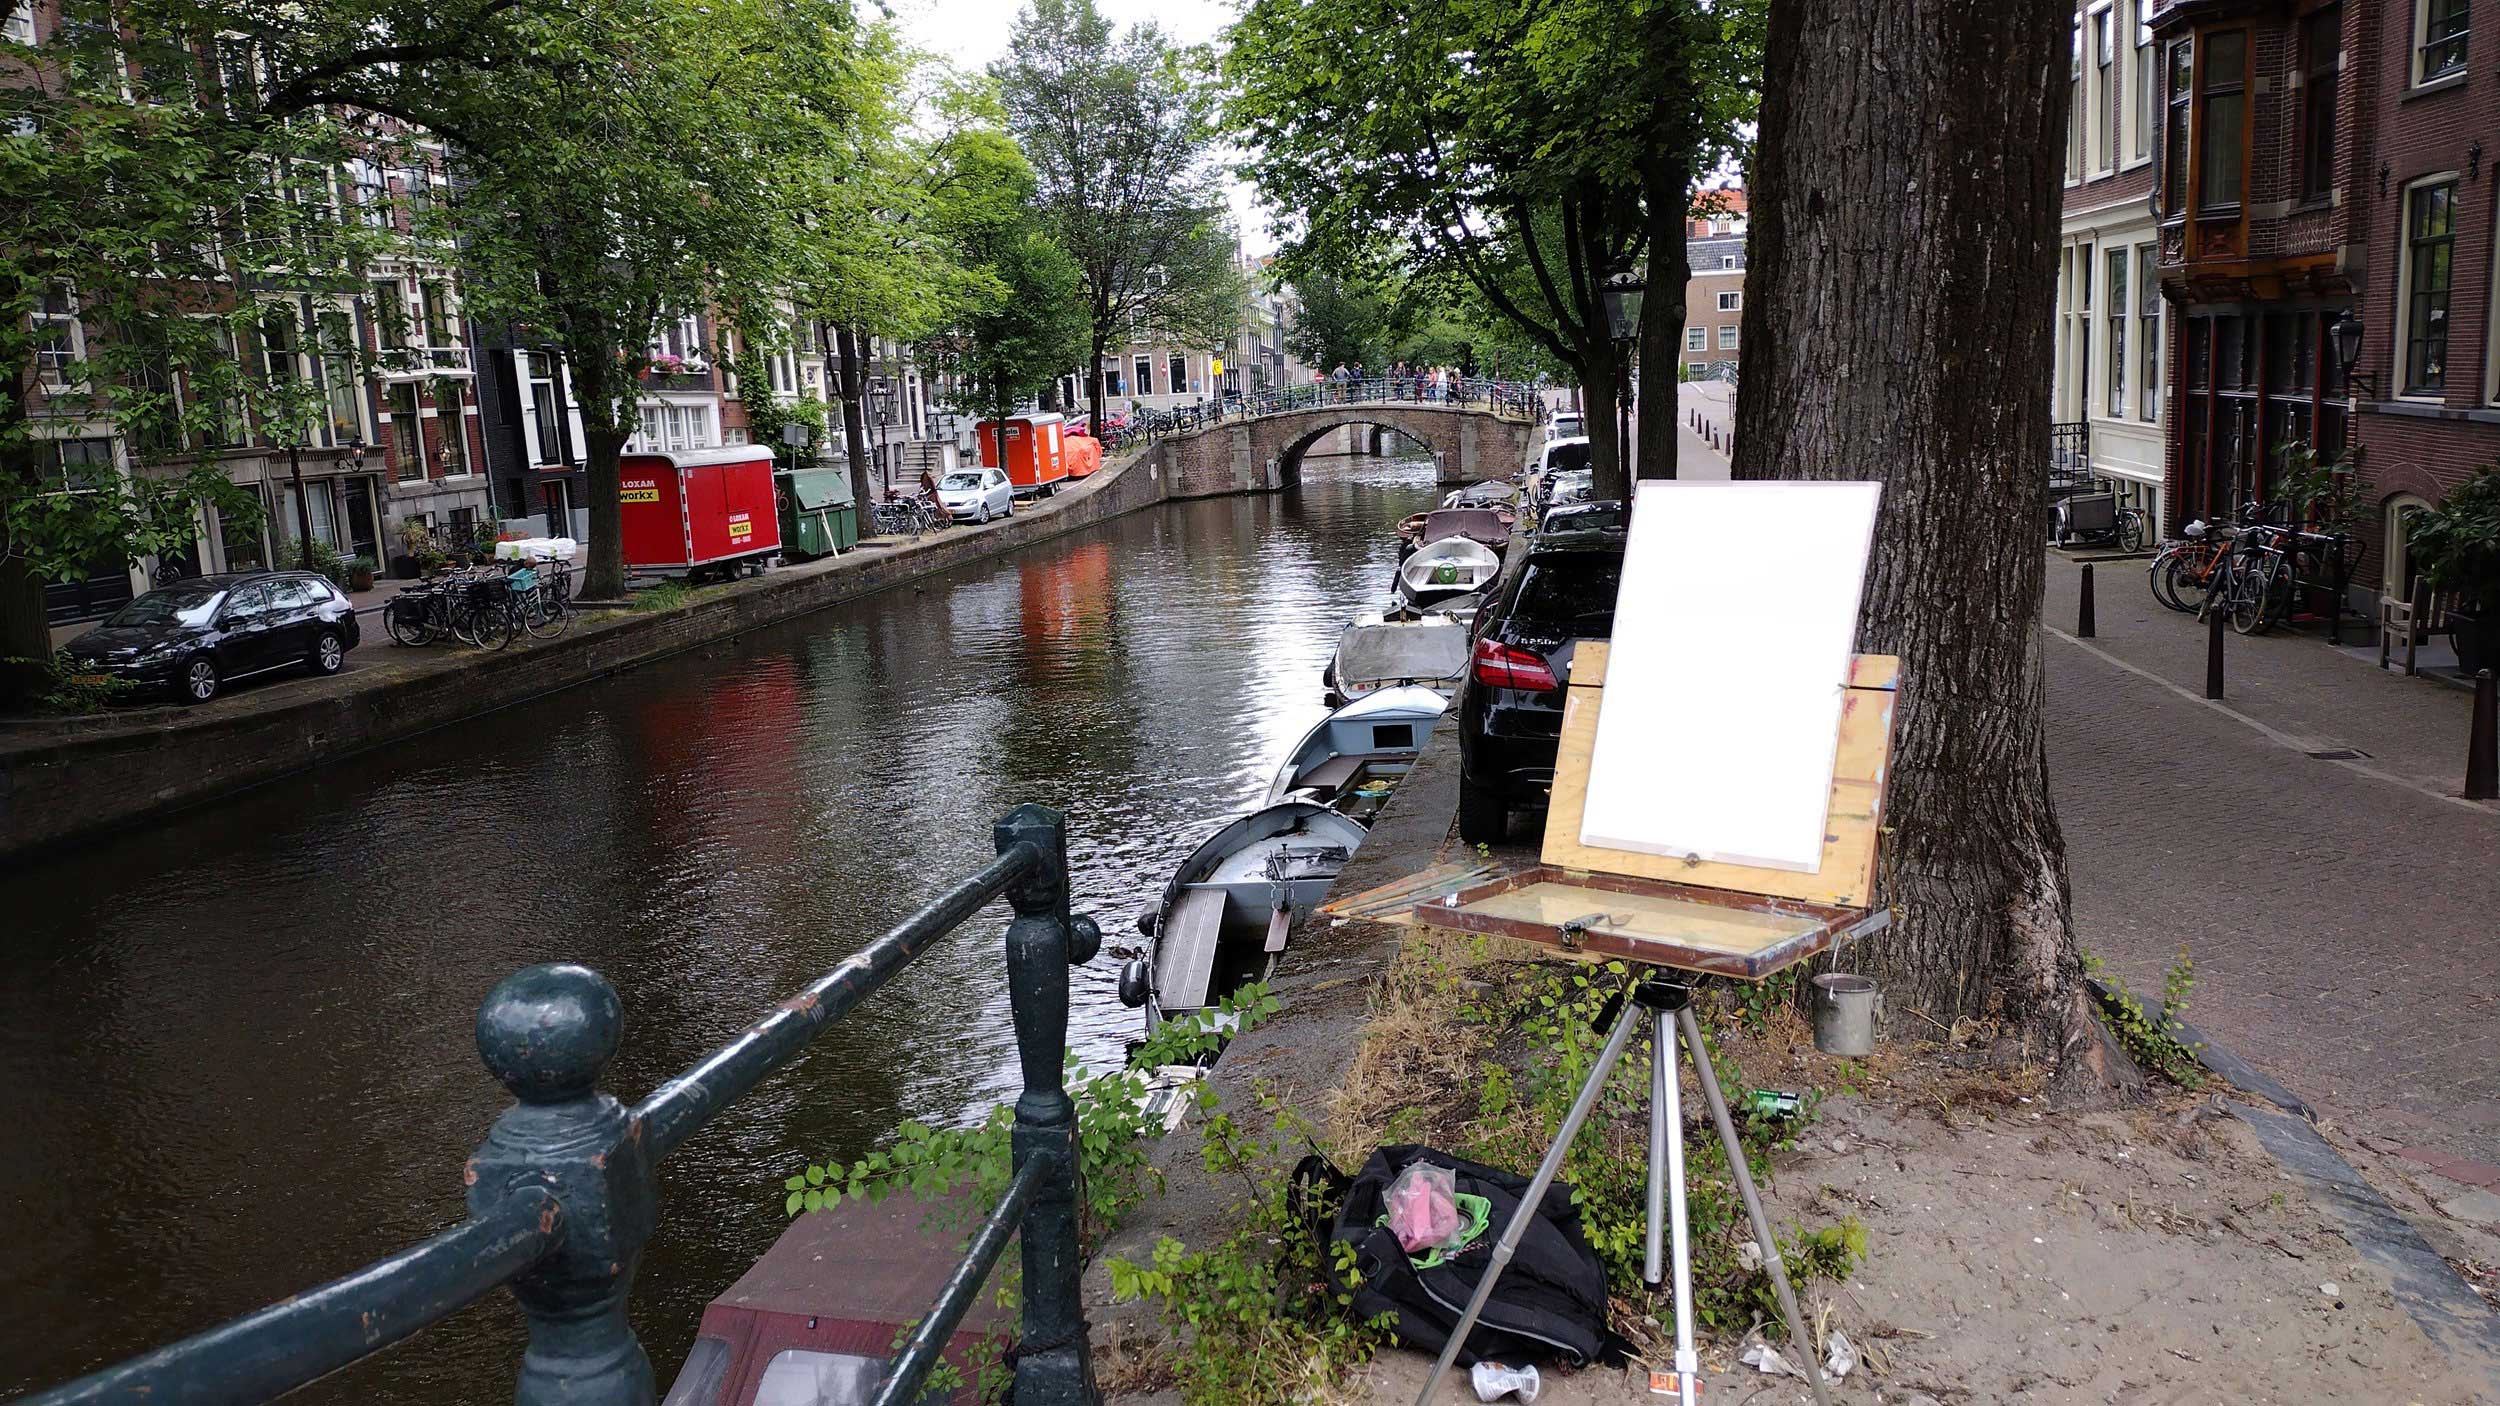 A canvas is set up on an easel on the edge of a canal in Amsterdam.